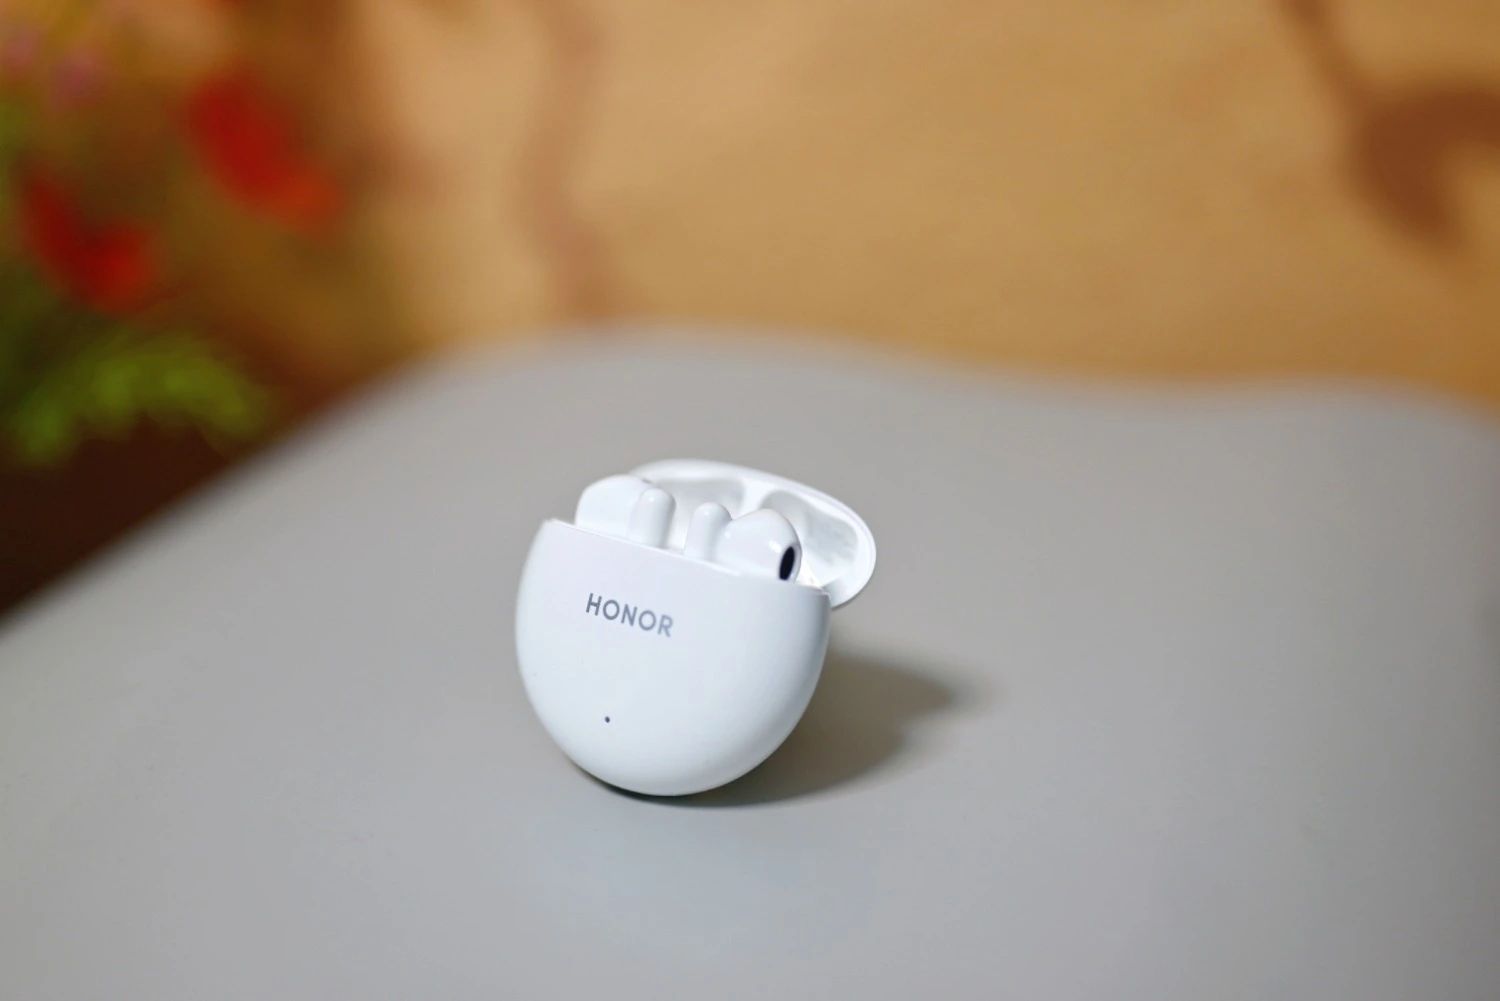 Honor Earbuds X5 Review